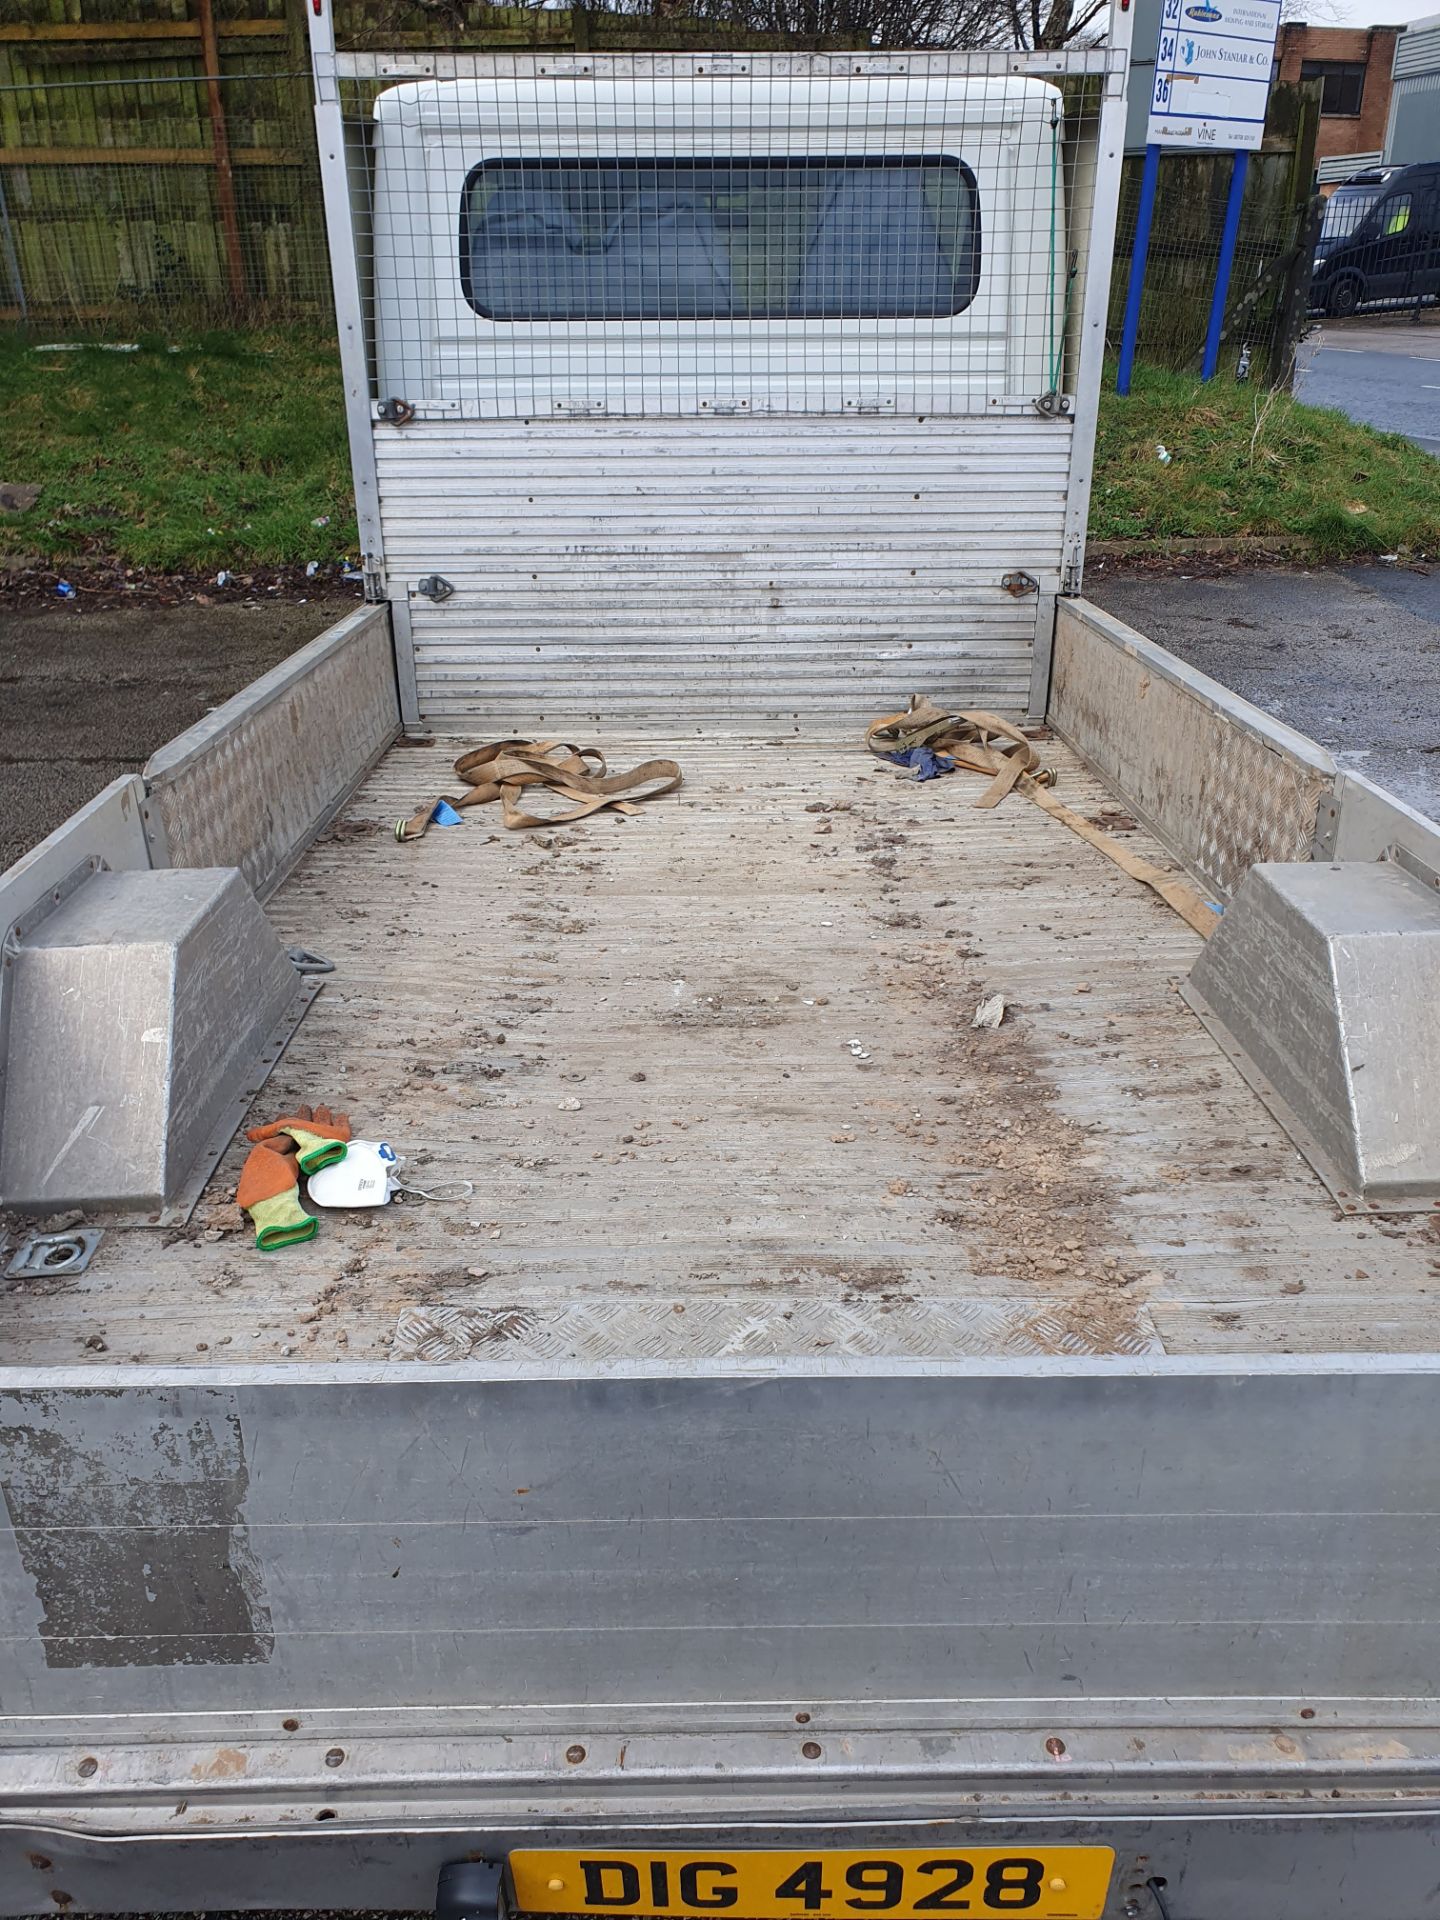 Citroen Relay X2-50 Flat Lorry w/ Loading Ramp Sides | DIG 4928 | 148,060 Miles - Image 10 of 20